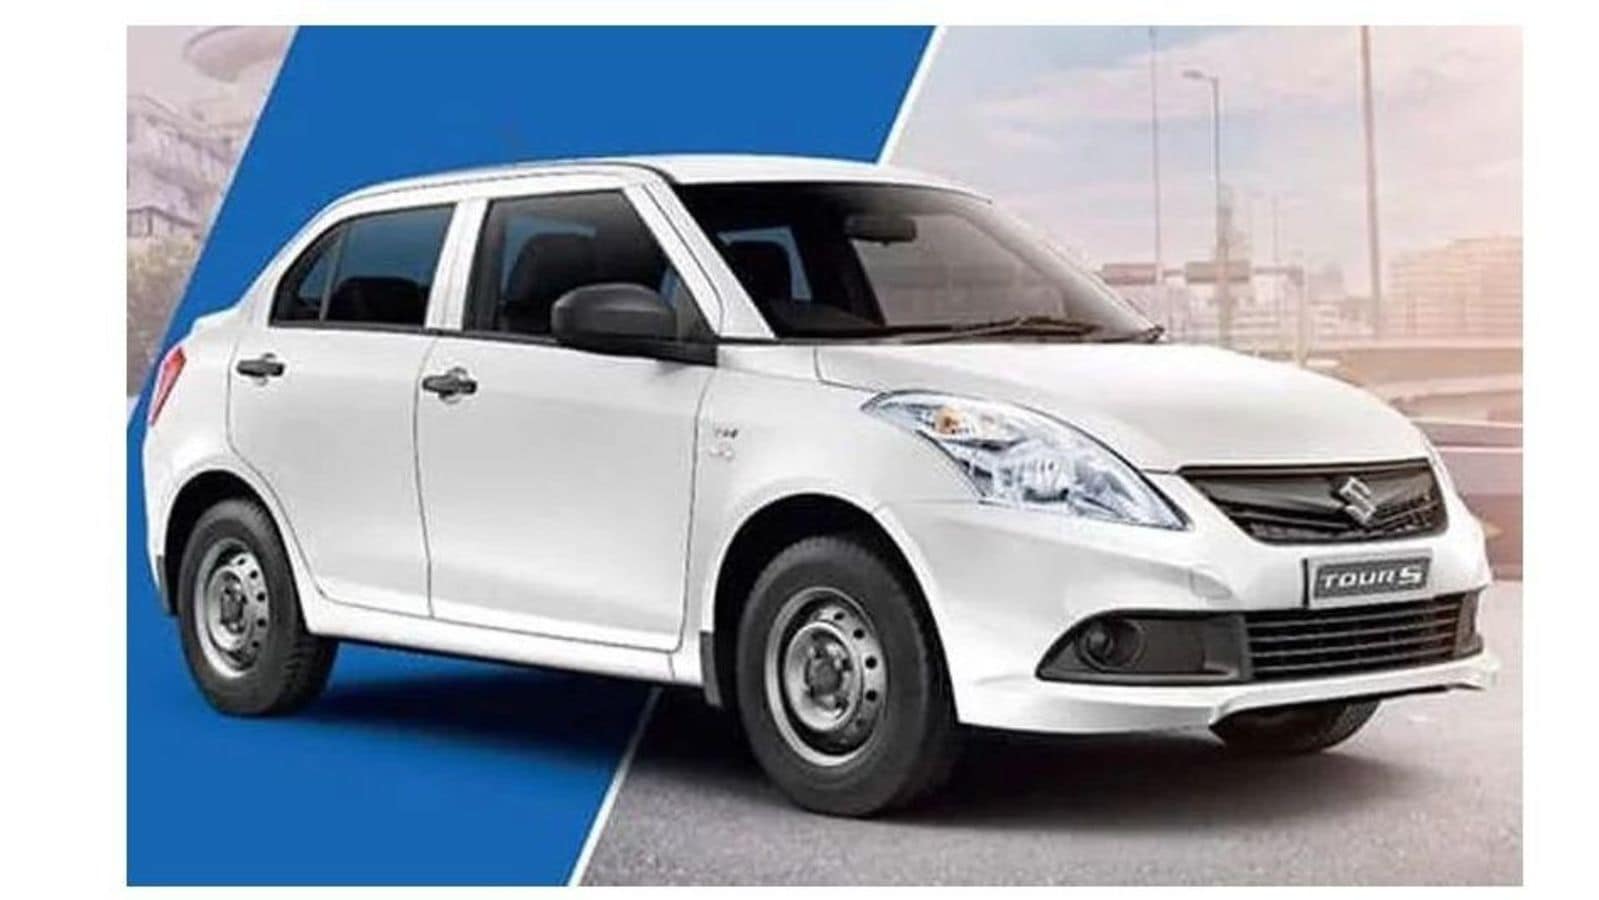 dzire tour cng on road price in patna